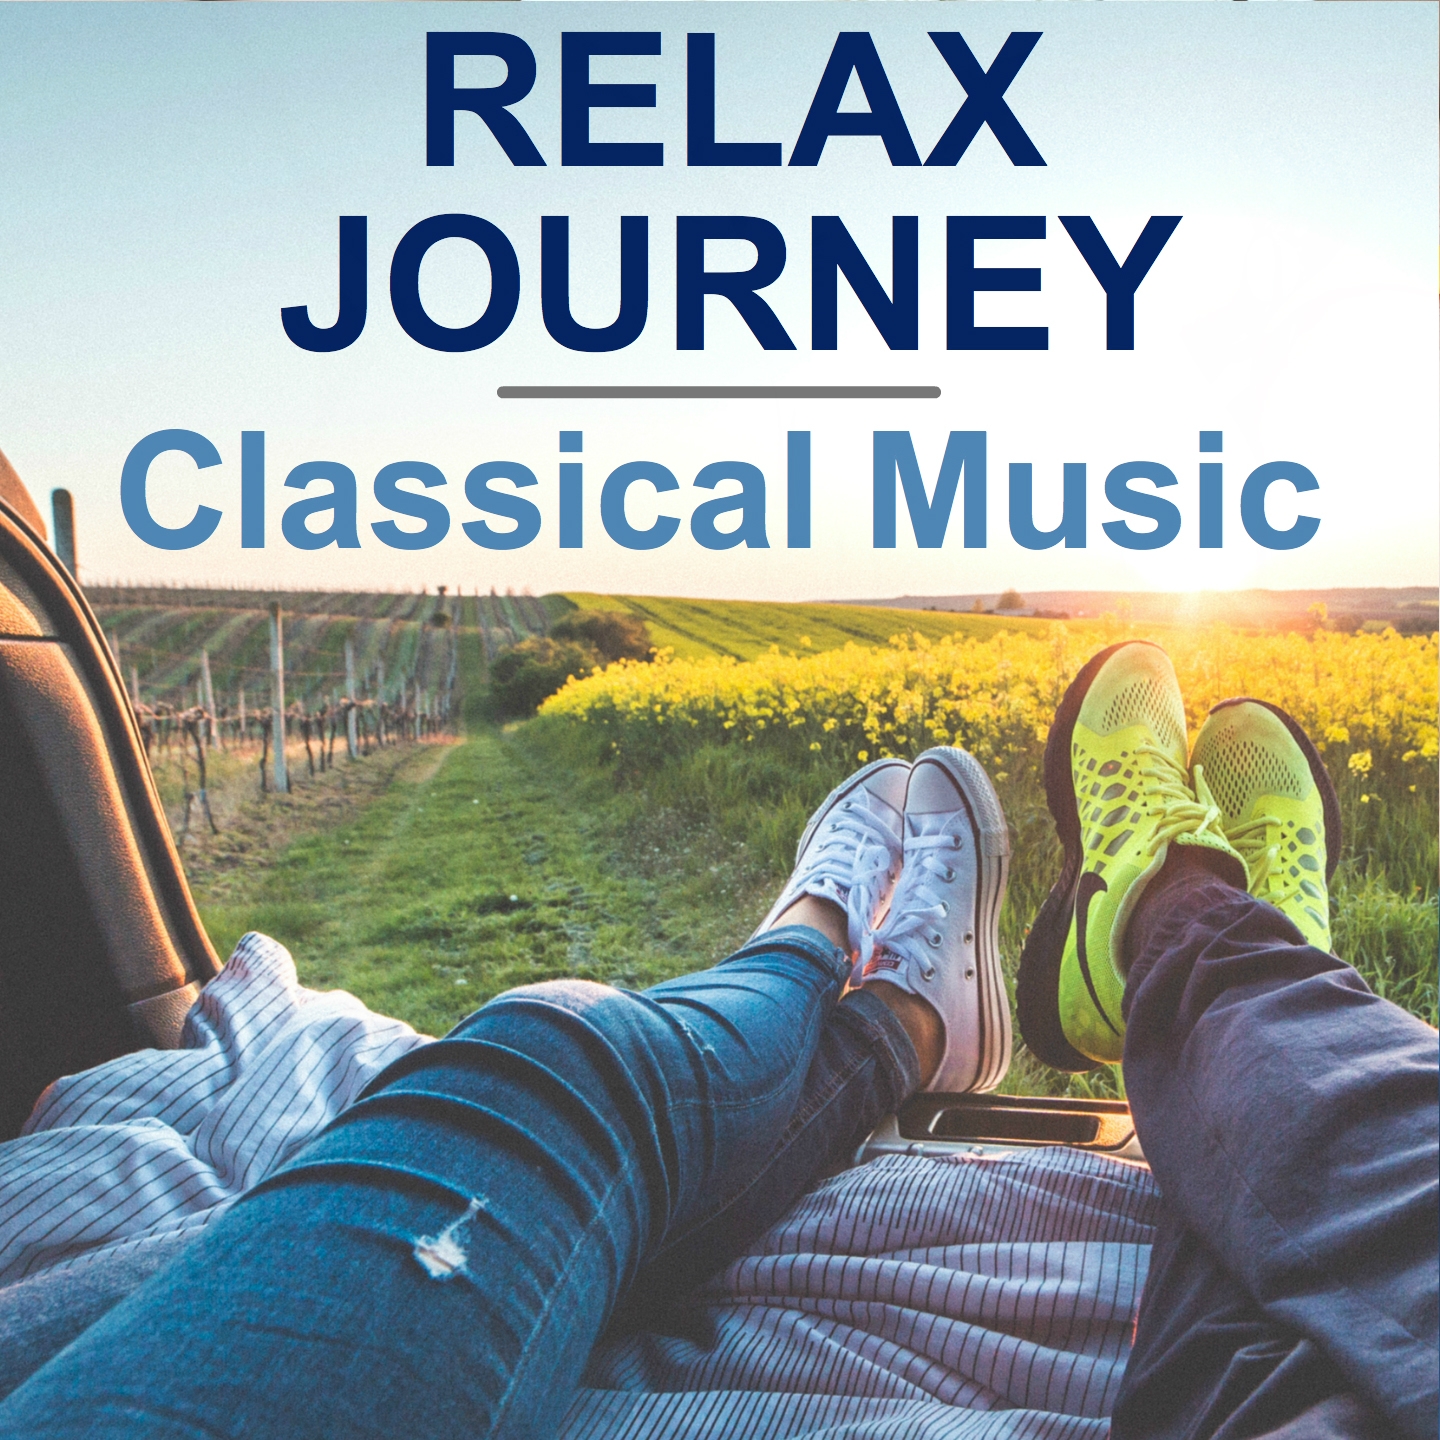 Relax Journey (Classical Music)